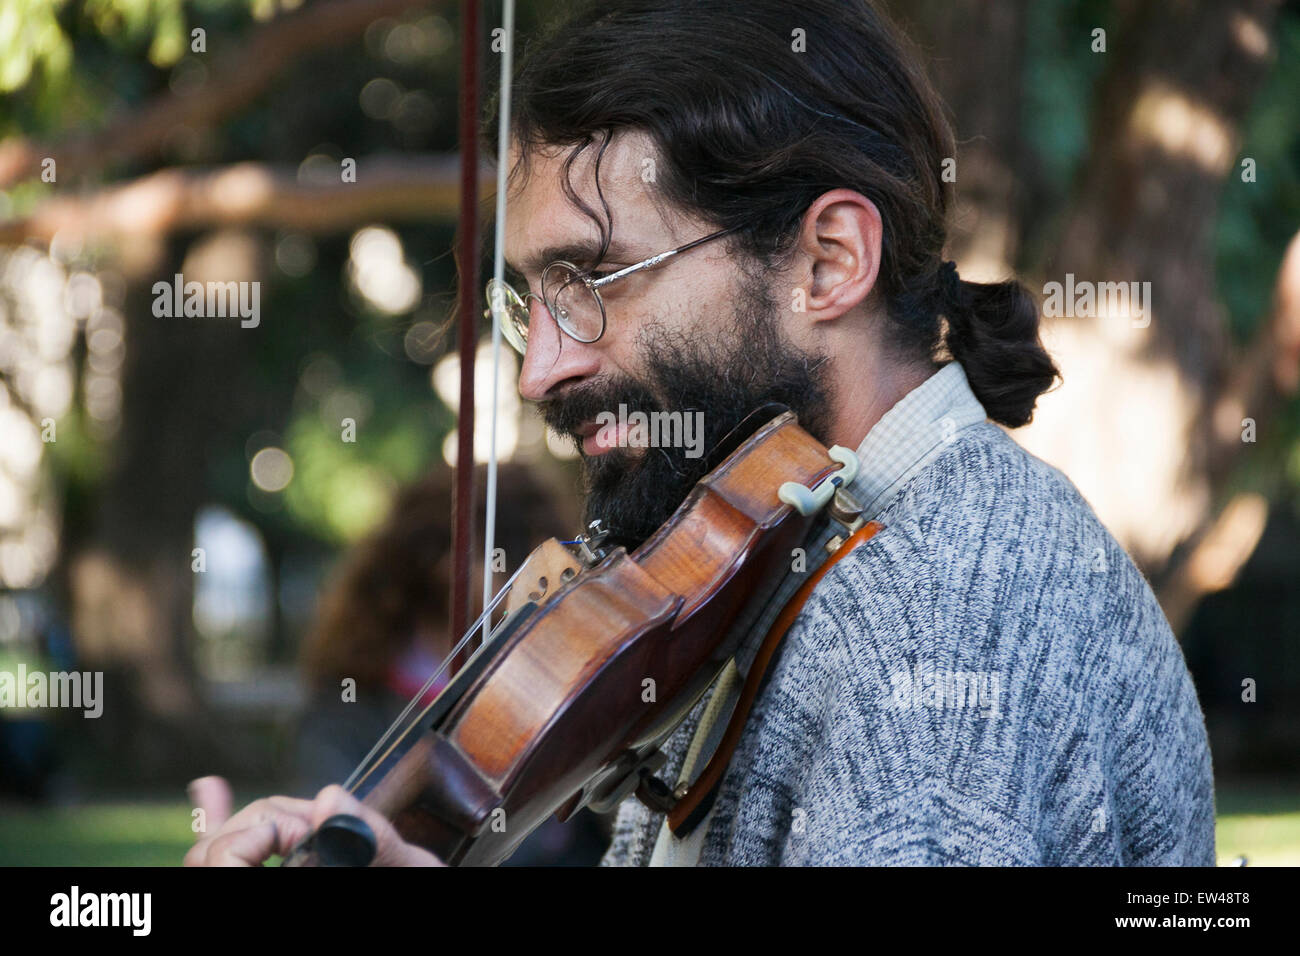 Violinist playing in the park. blurred background. man with glasses. Stock Photo